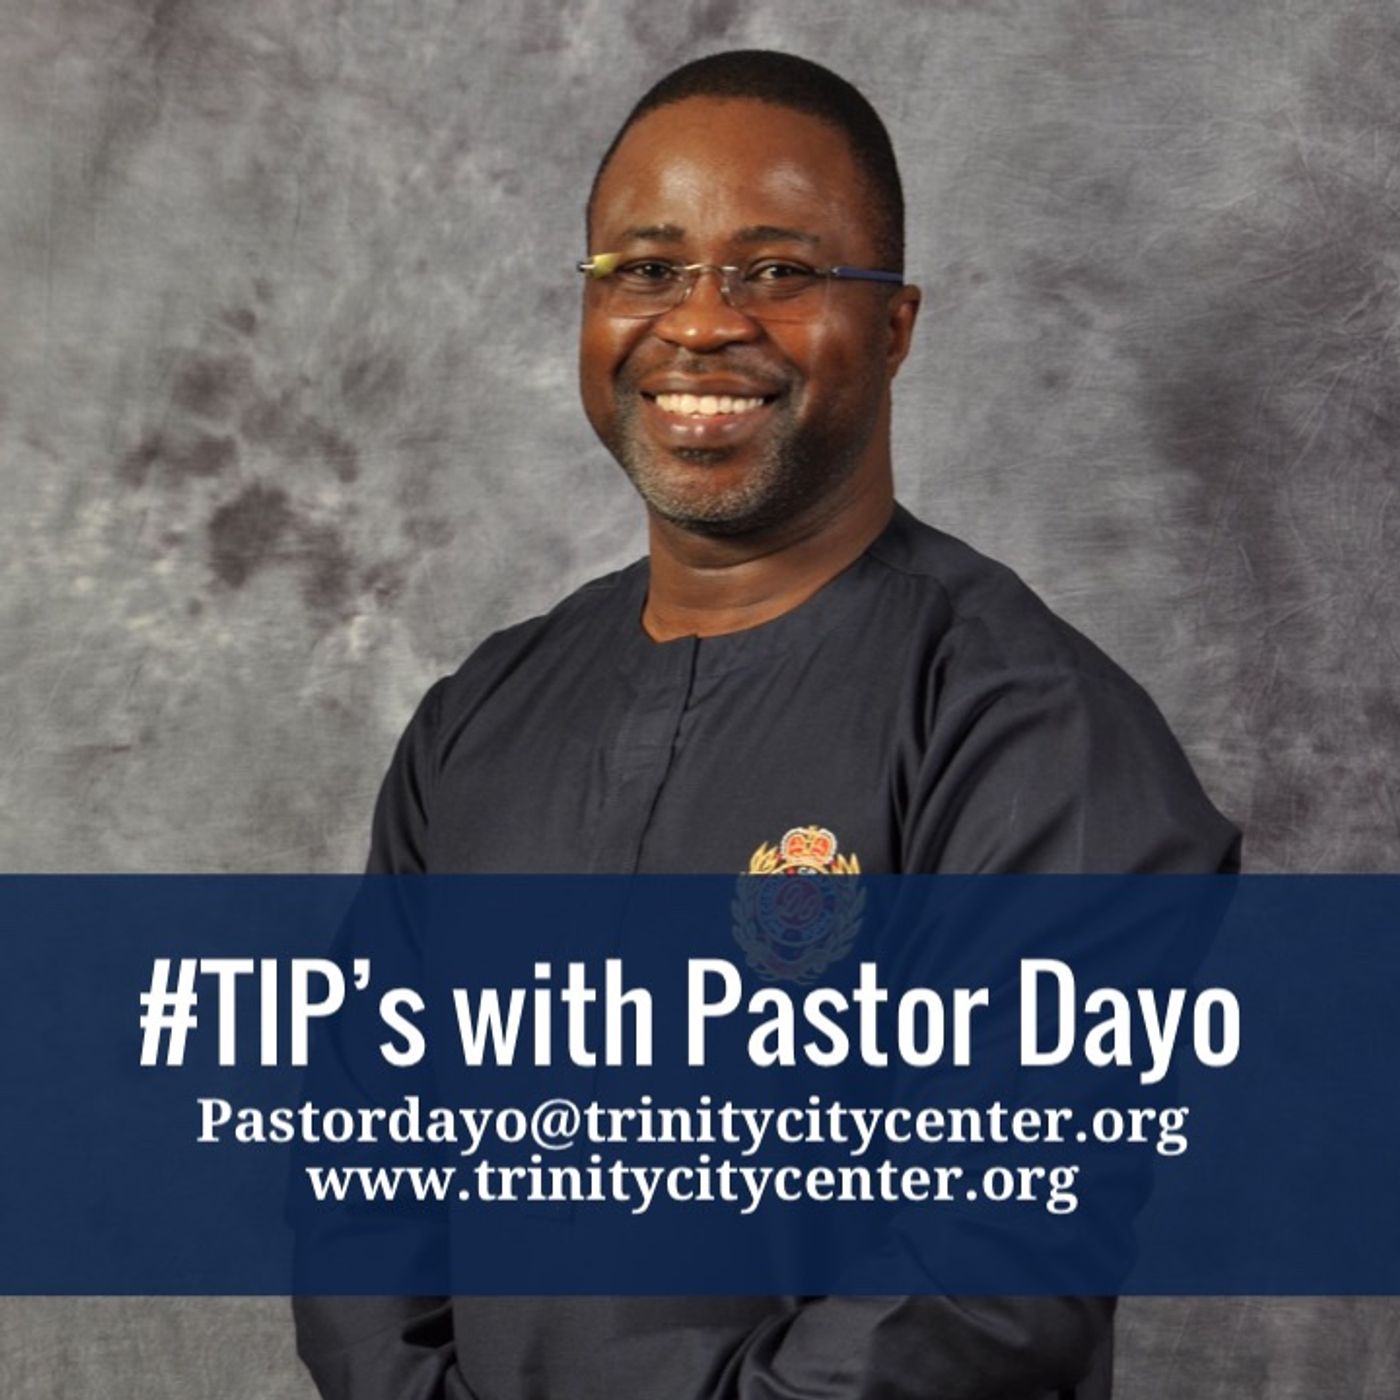 Episode 40 - TIP’s with Pastor Dayo